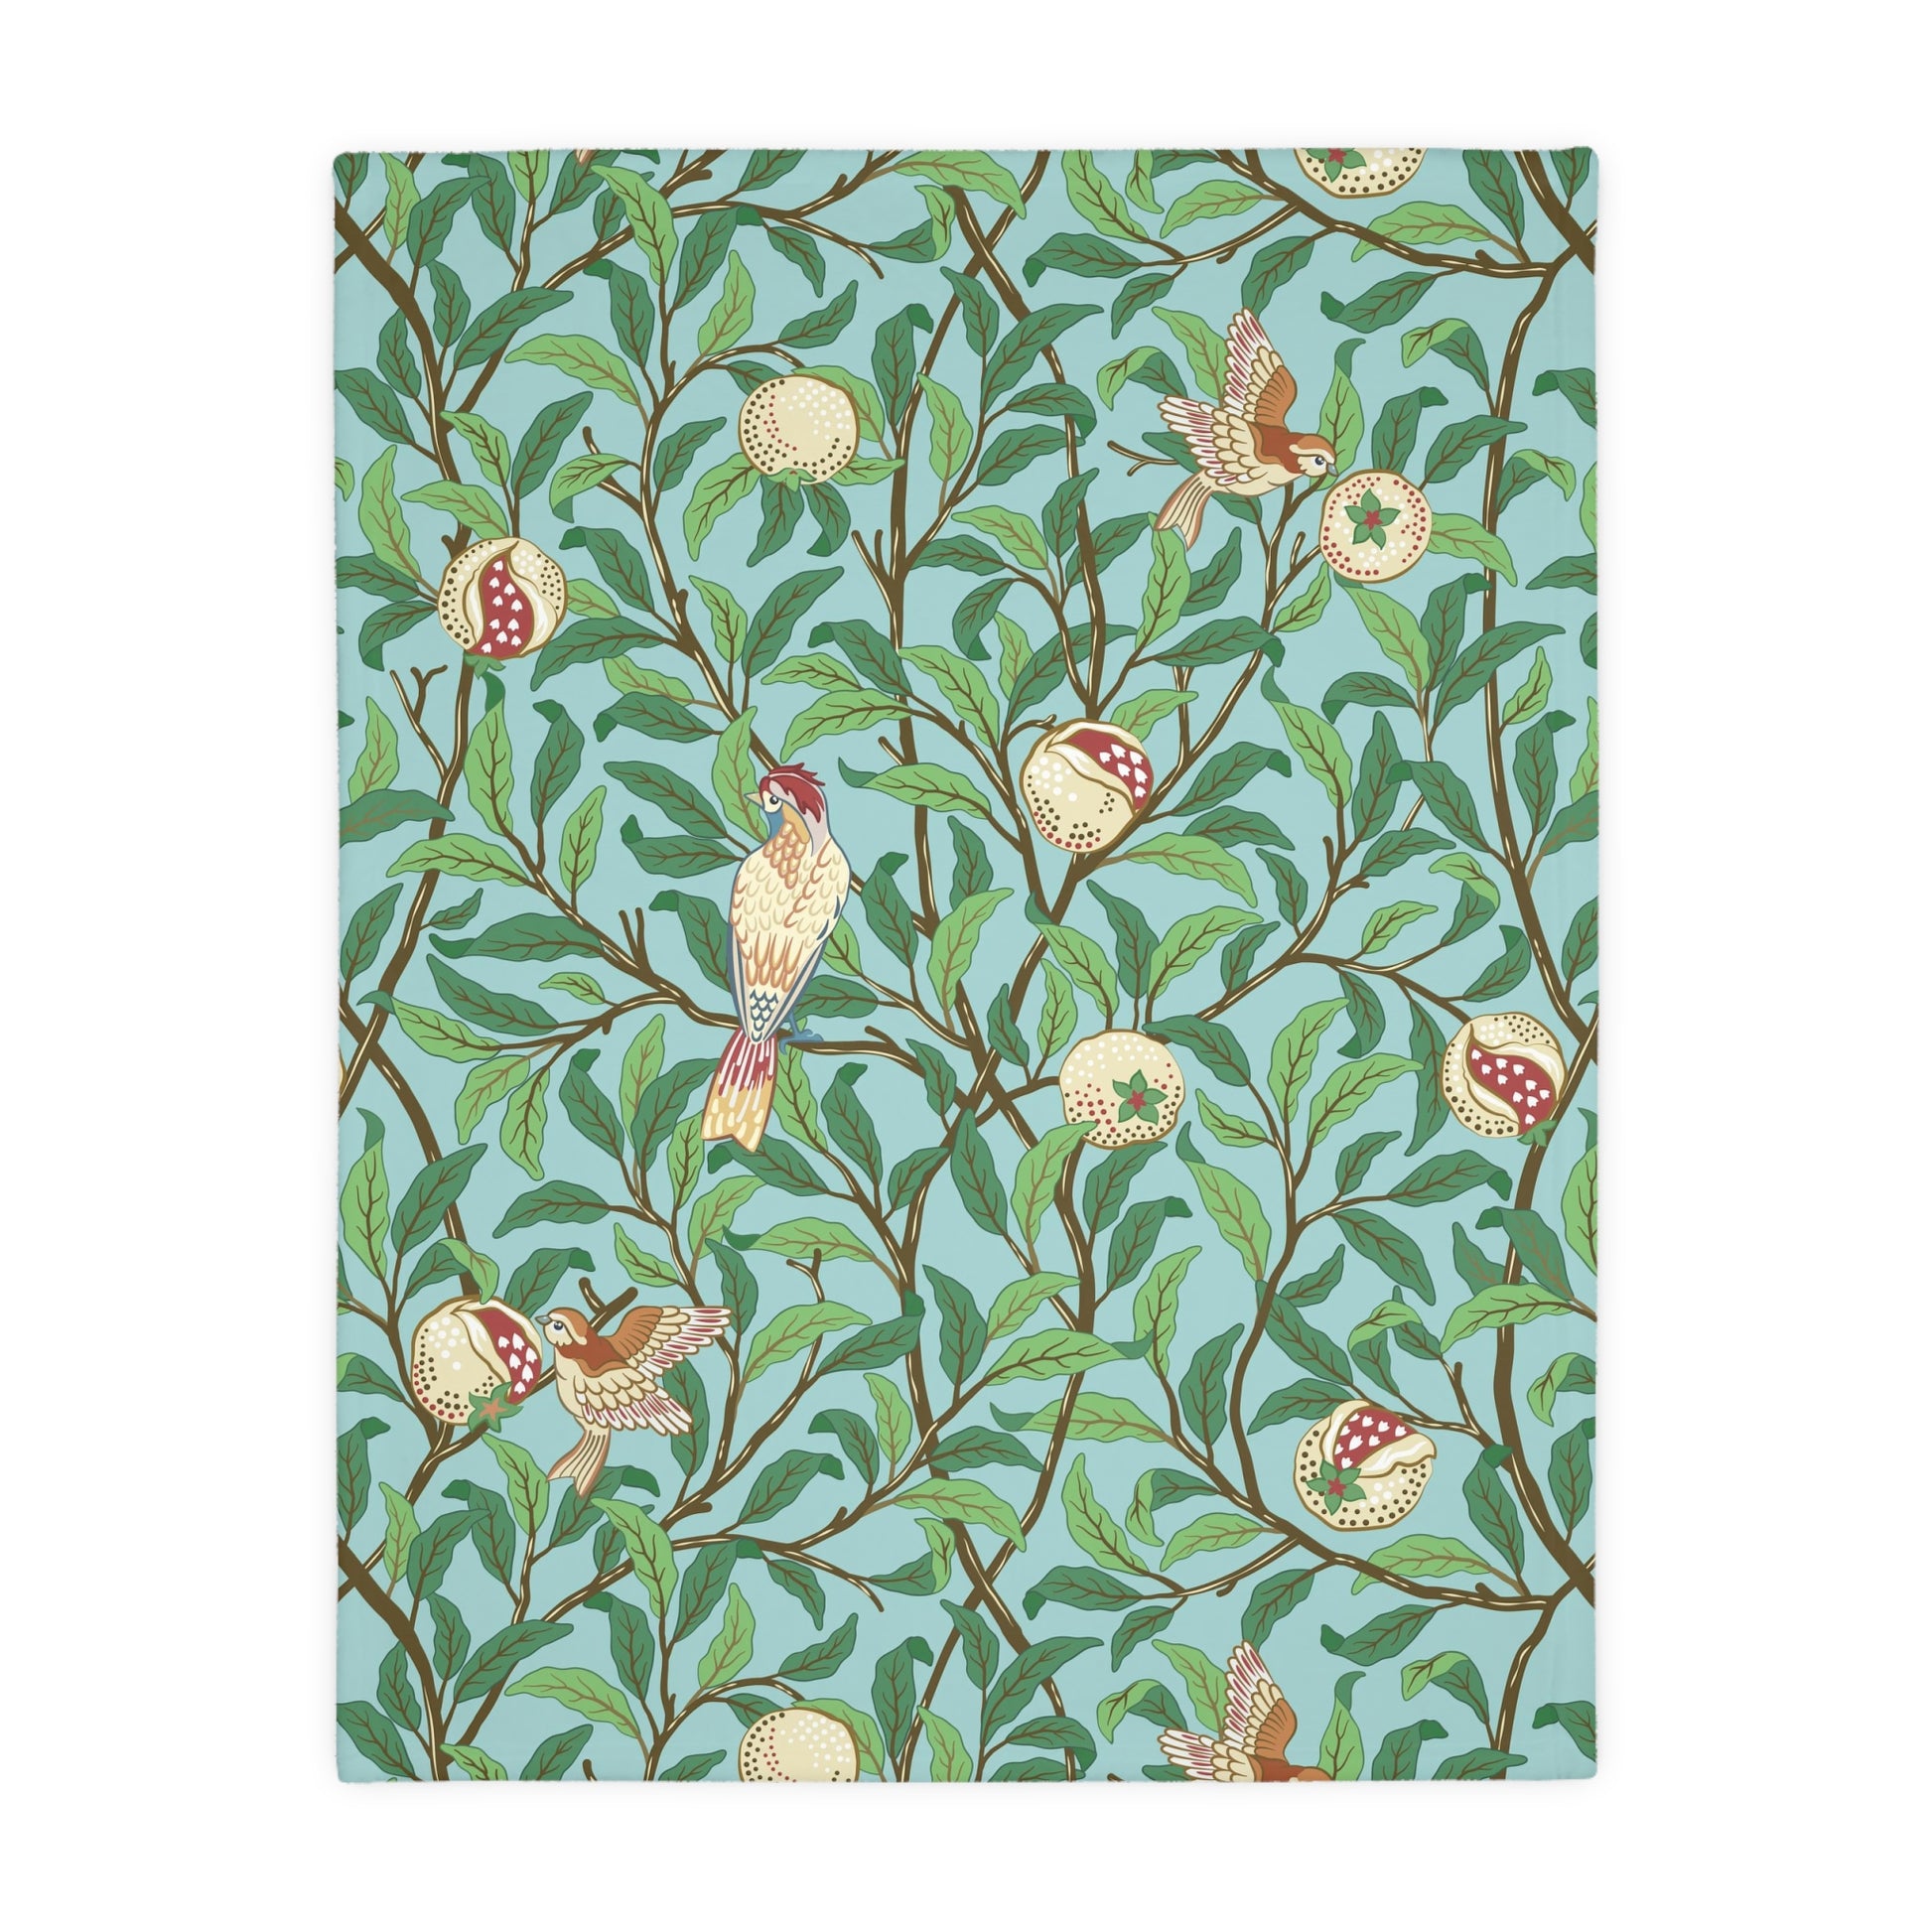 william-morris-co-luxury-velveteen-minky-blanket-two-sided-print-bird-and-pomegranate-collection-tiffany-blue-onyx-10